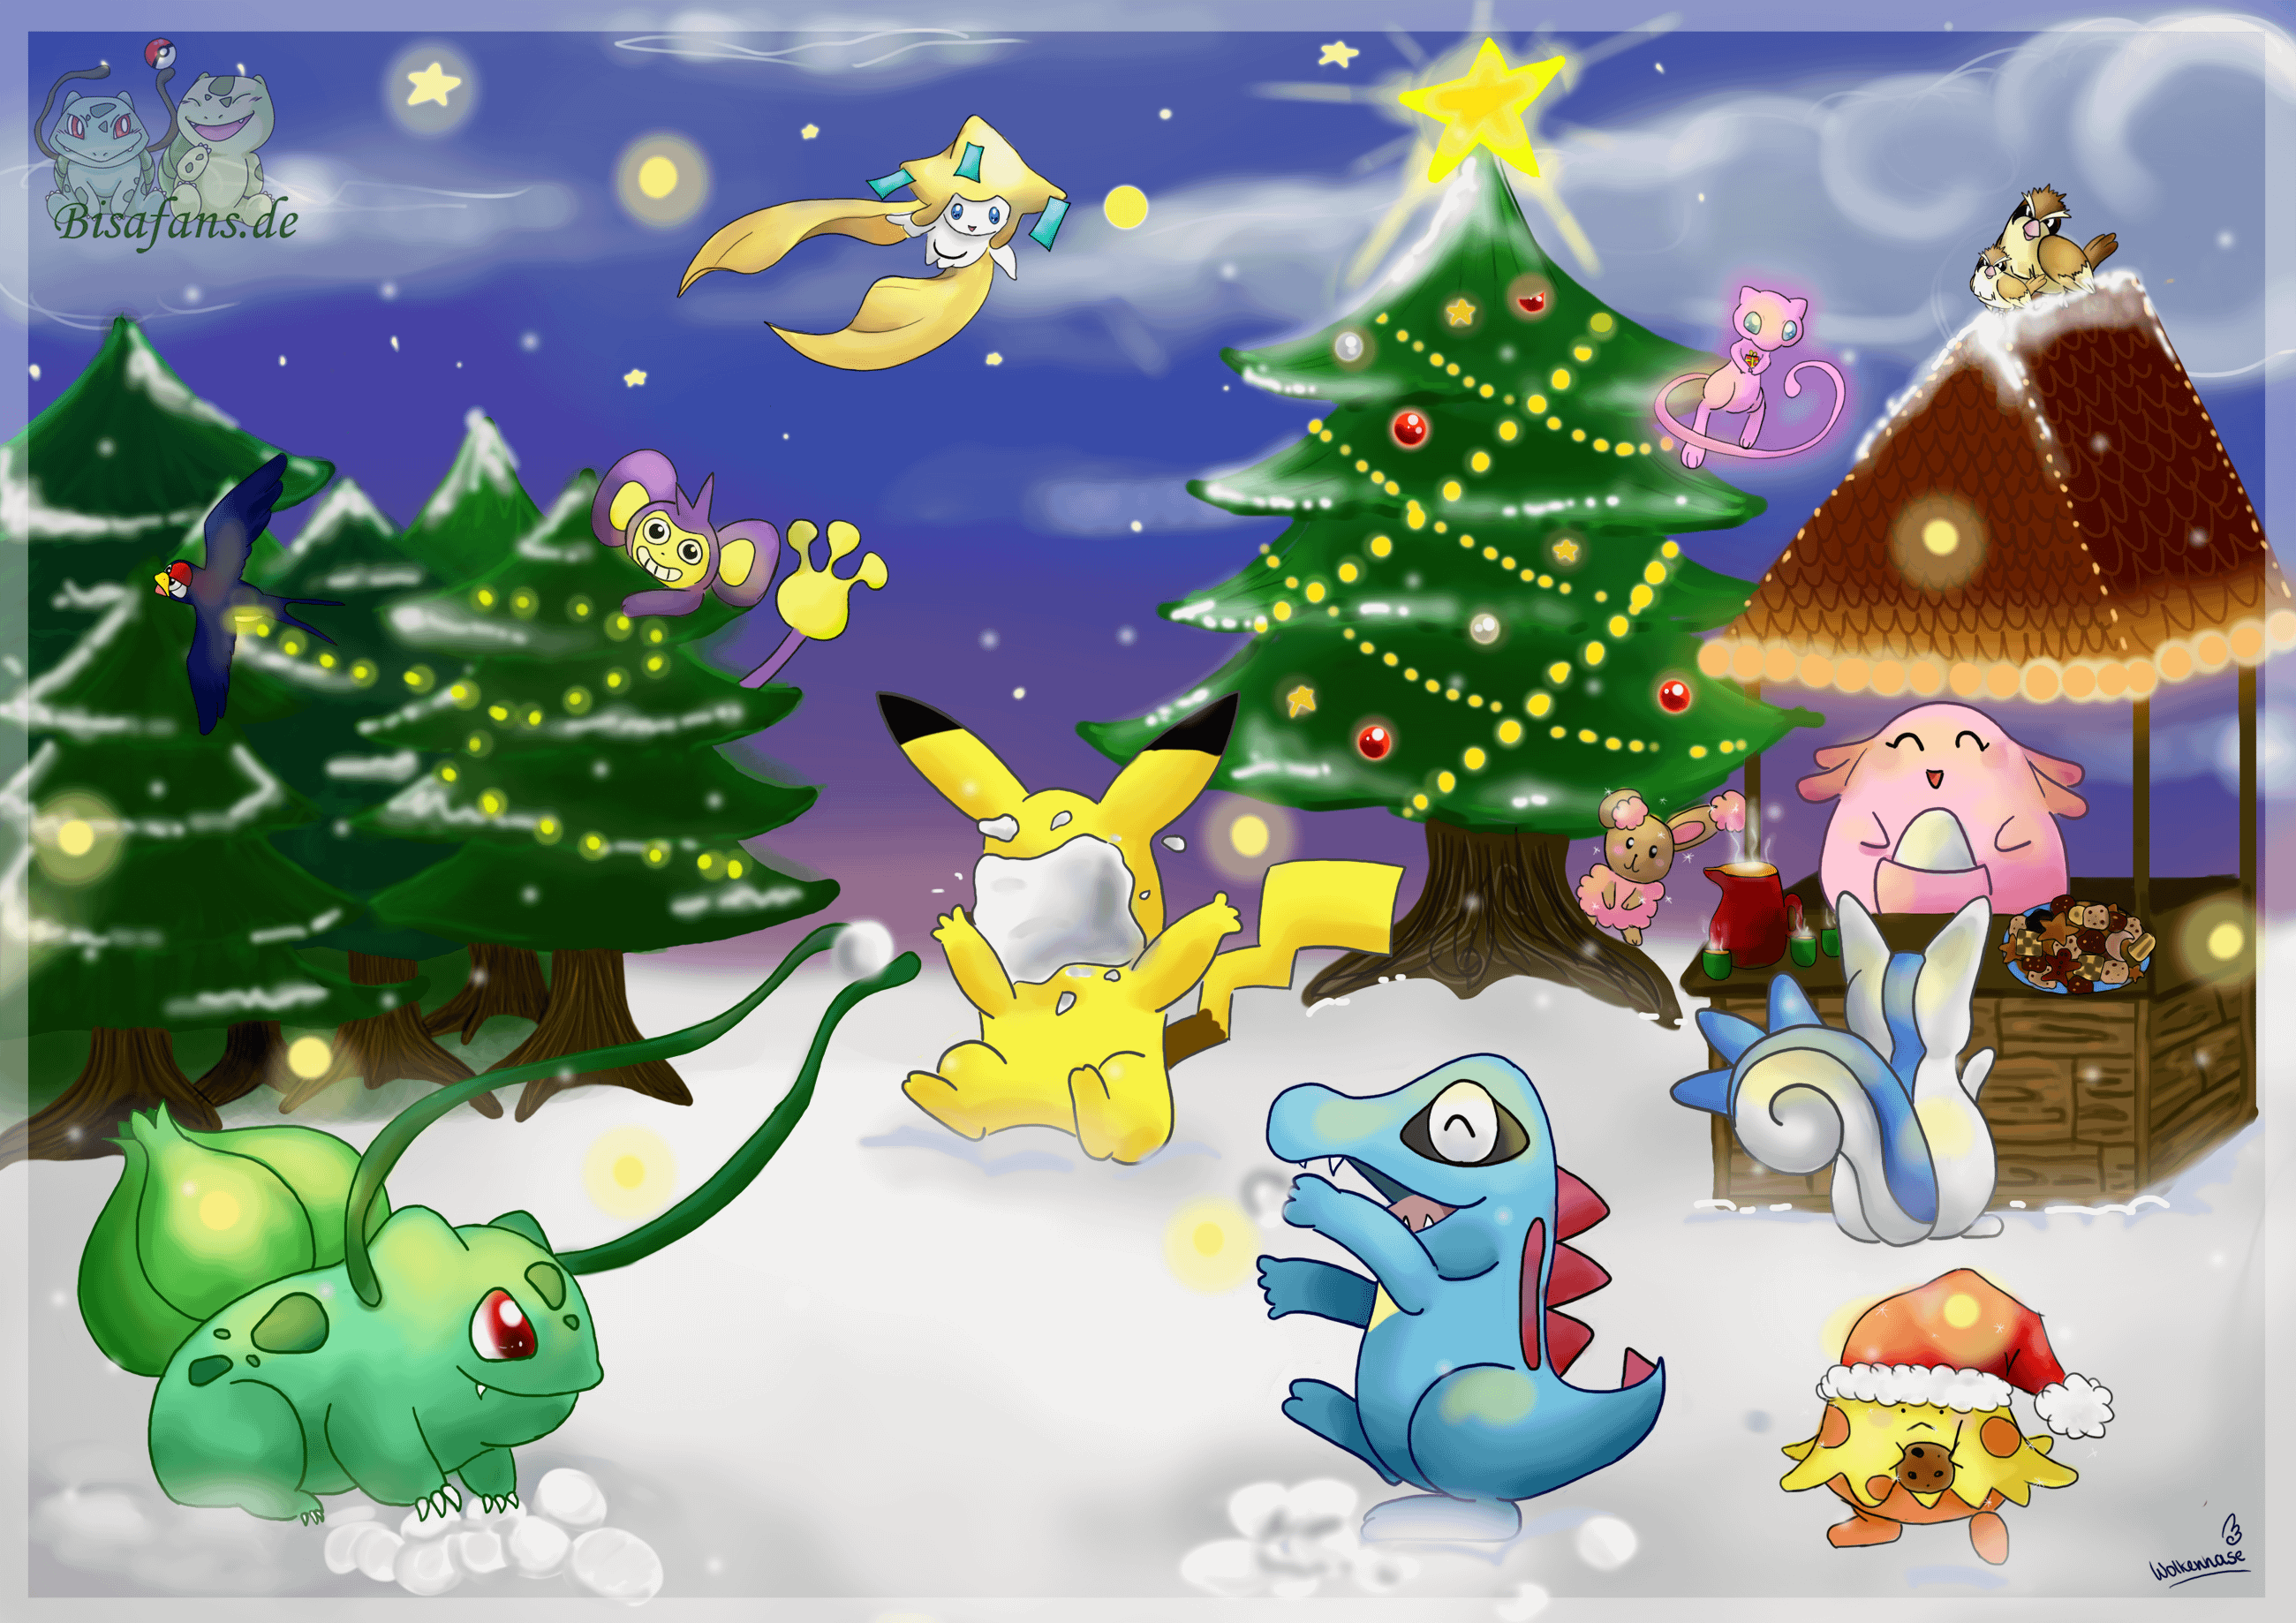 My Wallpaper for the Holidays rpokemon